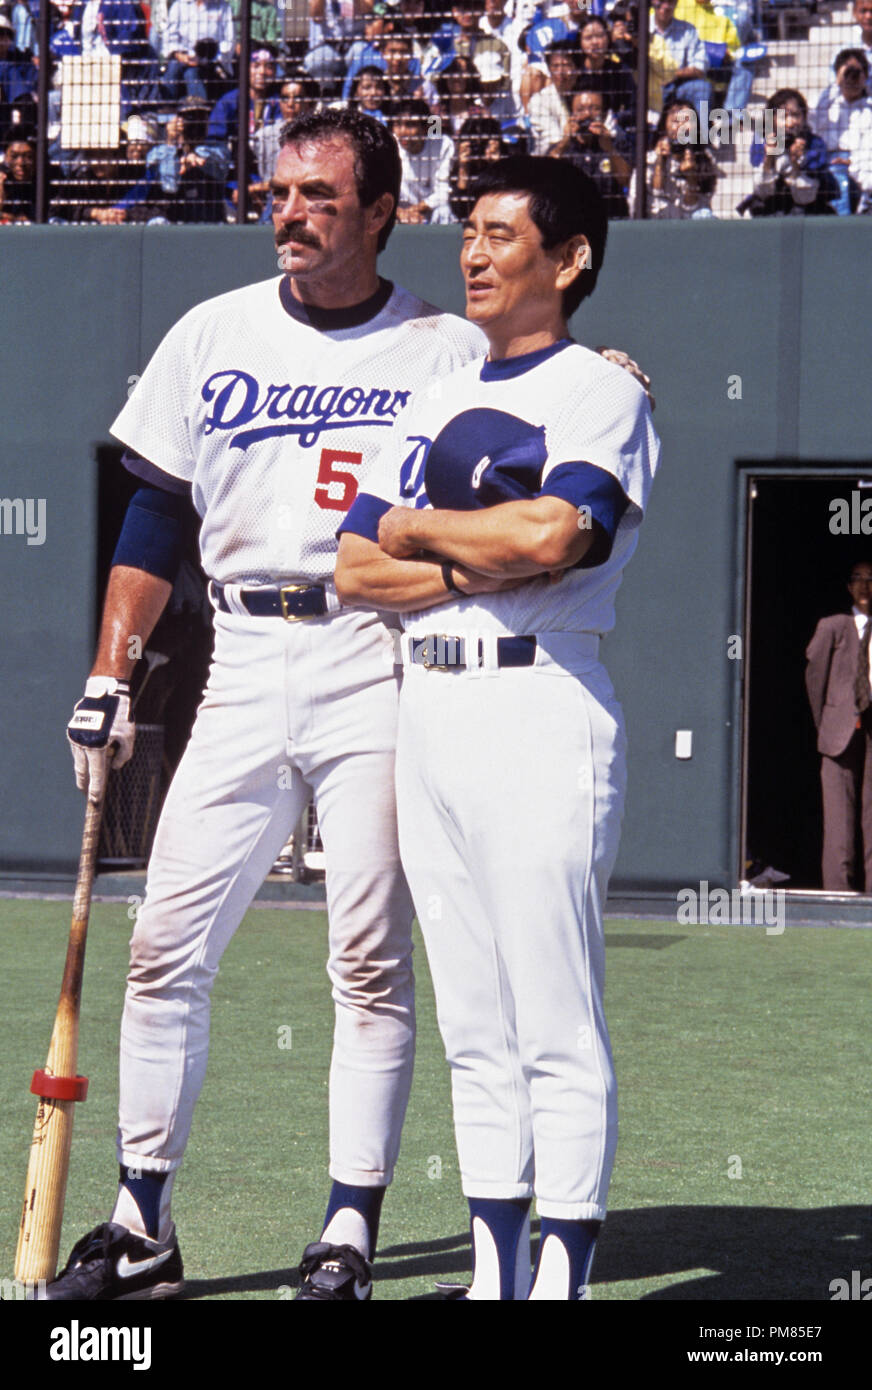 film-still-or-publicity-still-from-mr-baseball-tom-selleck-ken-takakura-1992-universal-pictures-photo-credit-emilio-lari-all-rights-reserved-file-reference-31487-157tha-for-editorial-use-only-PM85E7.jpg